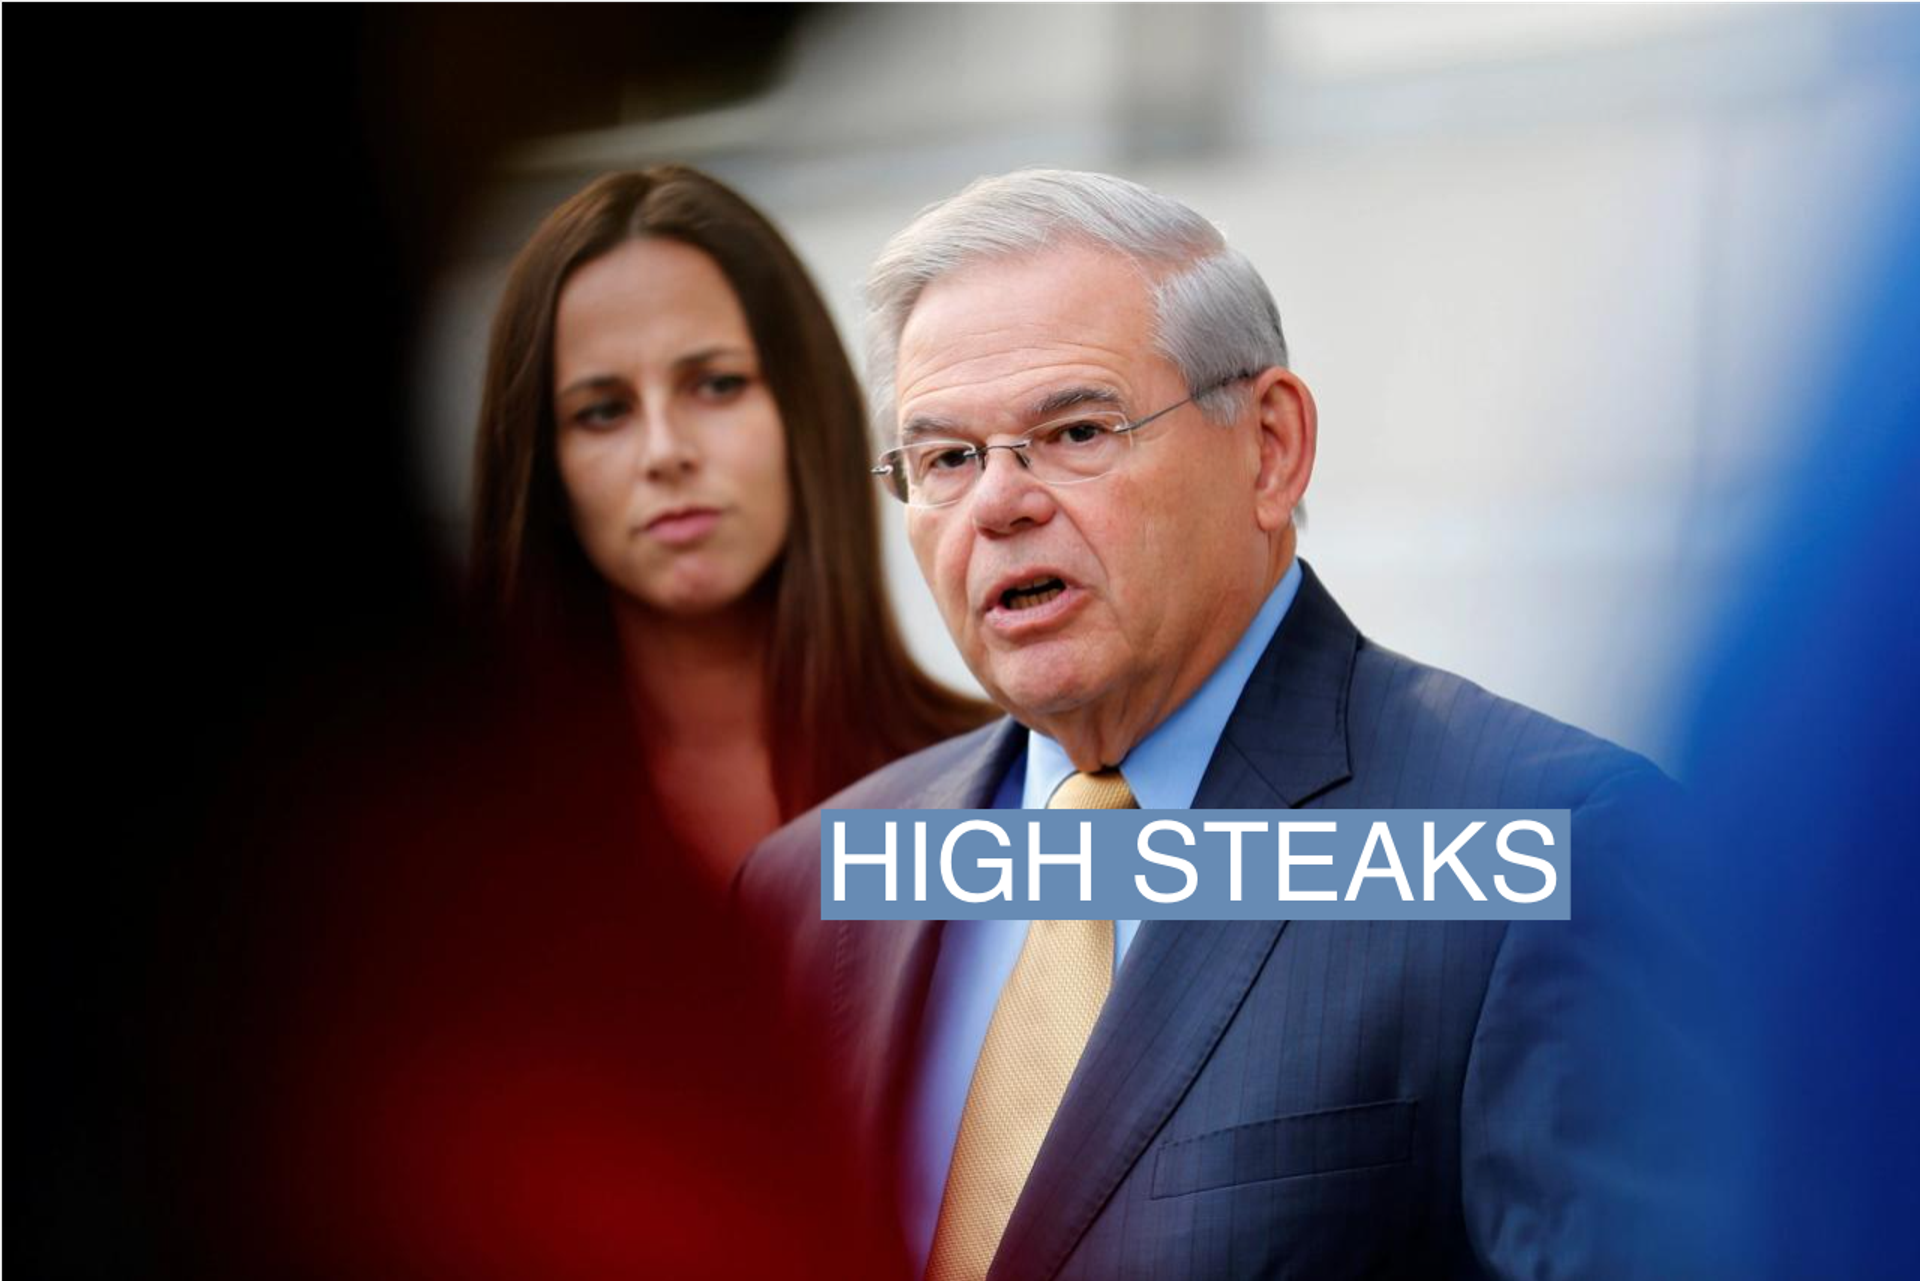 Senator Bob Menendez speaks to journalists after arriving to face trial for federal corruption charges as his daughter Alicia Menendez (L) looks on outside United States District Court for the District of New Jersey in Newark, New Jersey, U.S., September 6, 2017. 